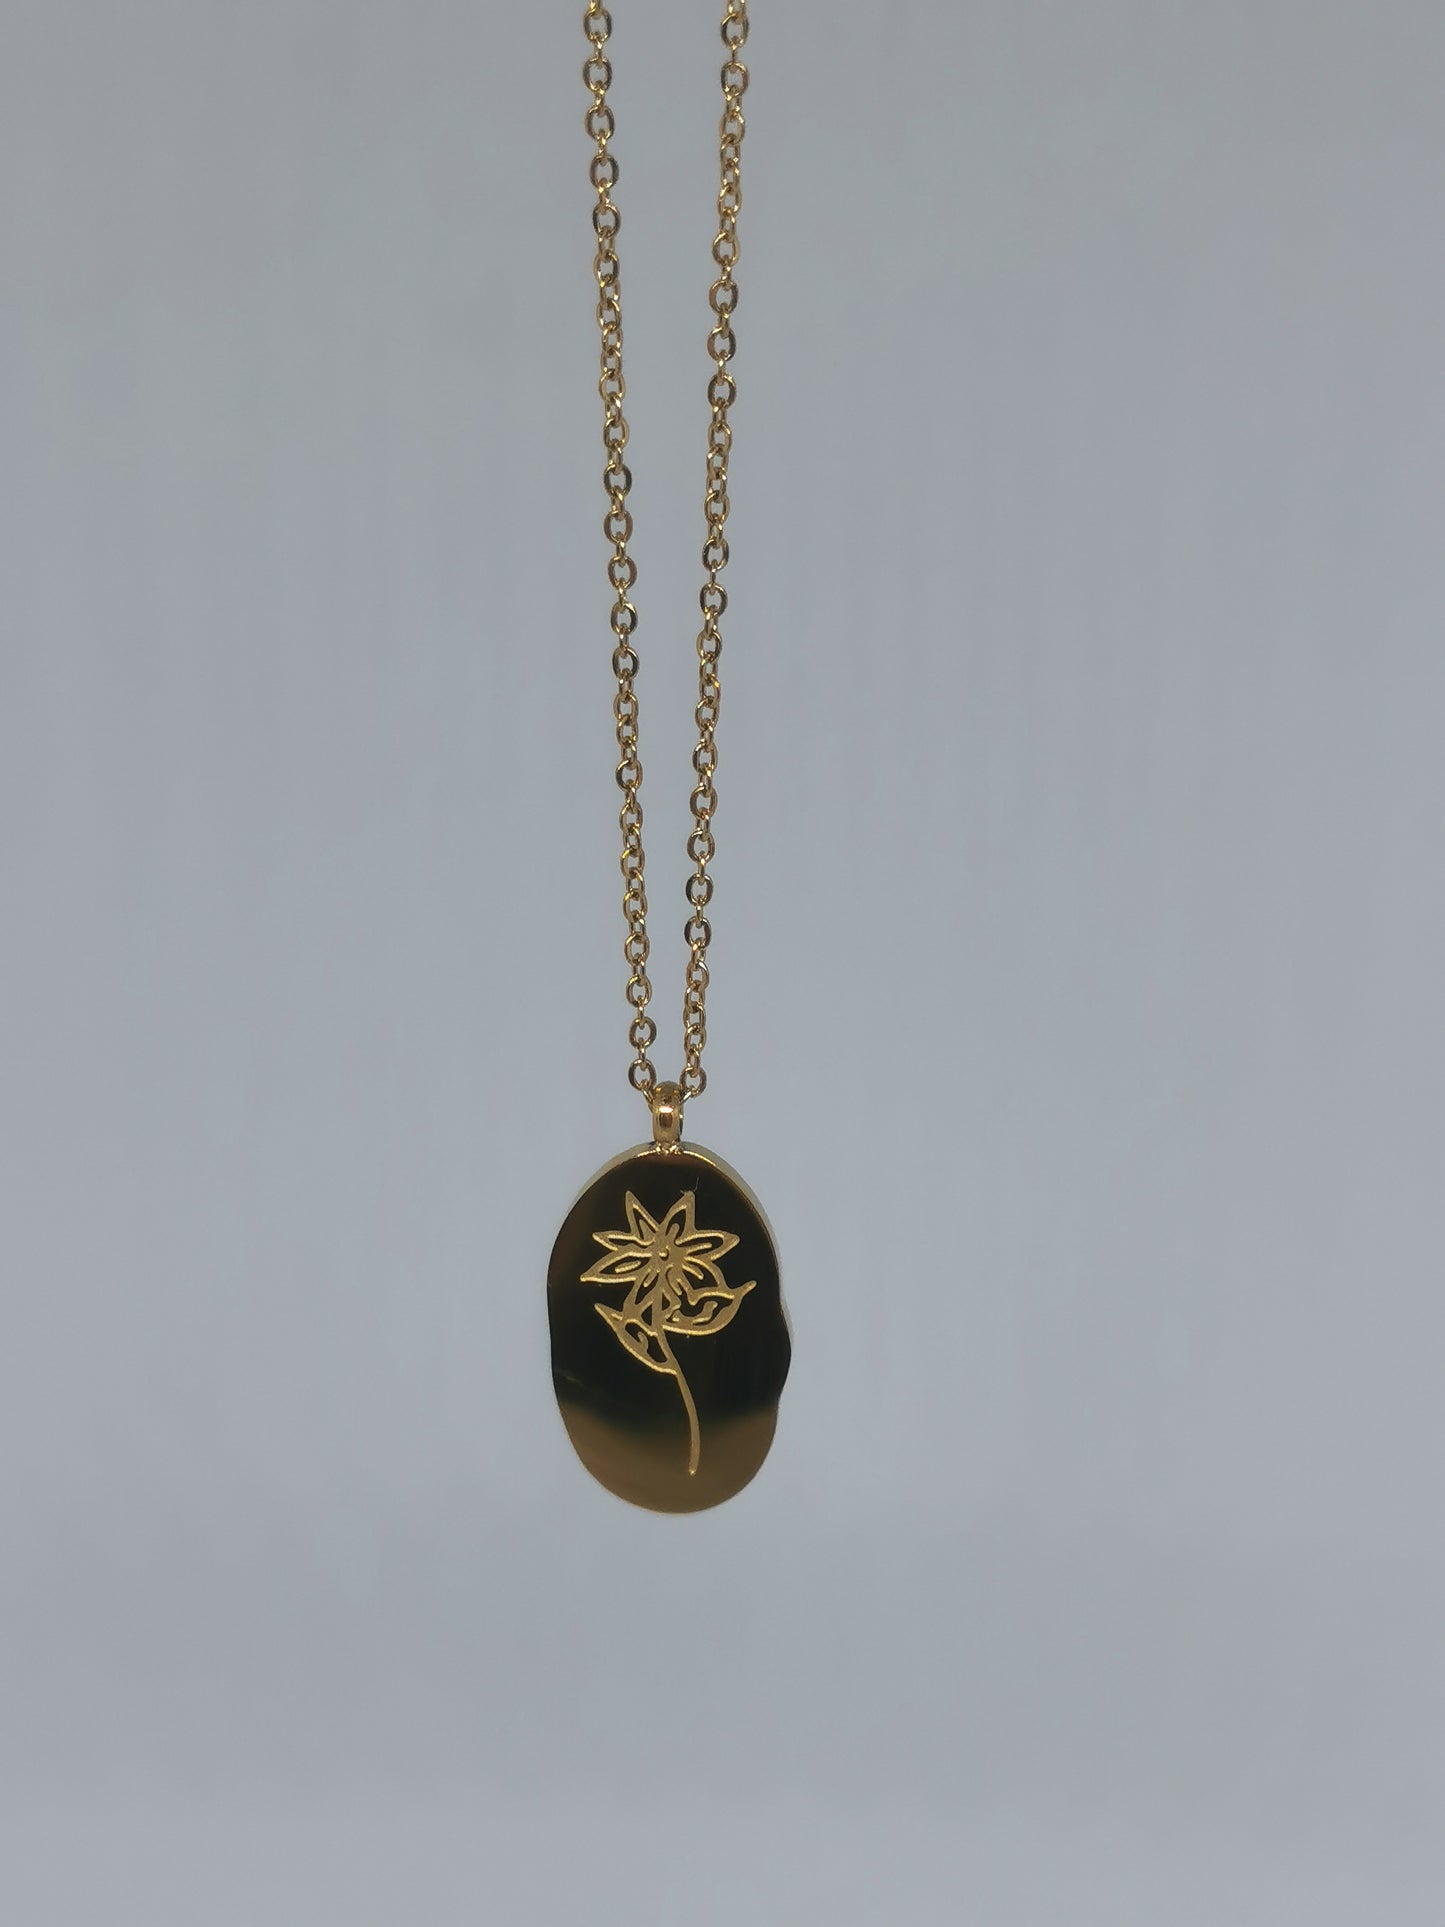 Birth Flower May (Lily) Necklace